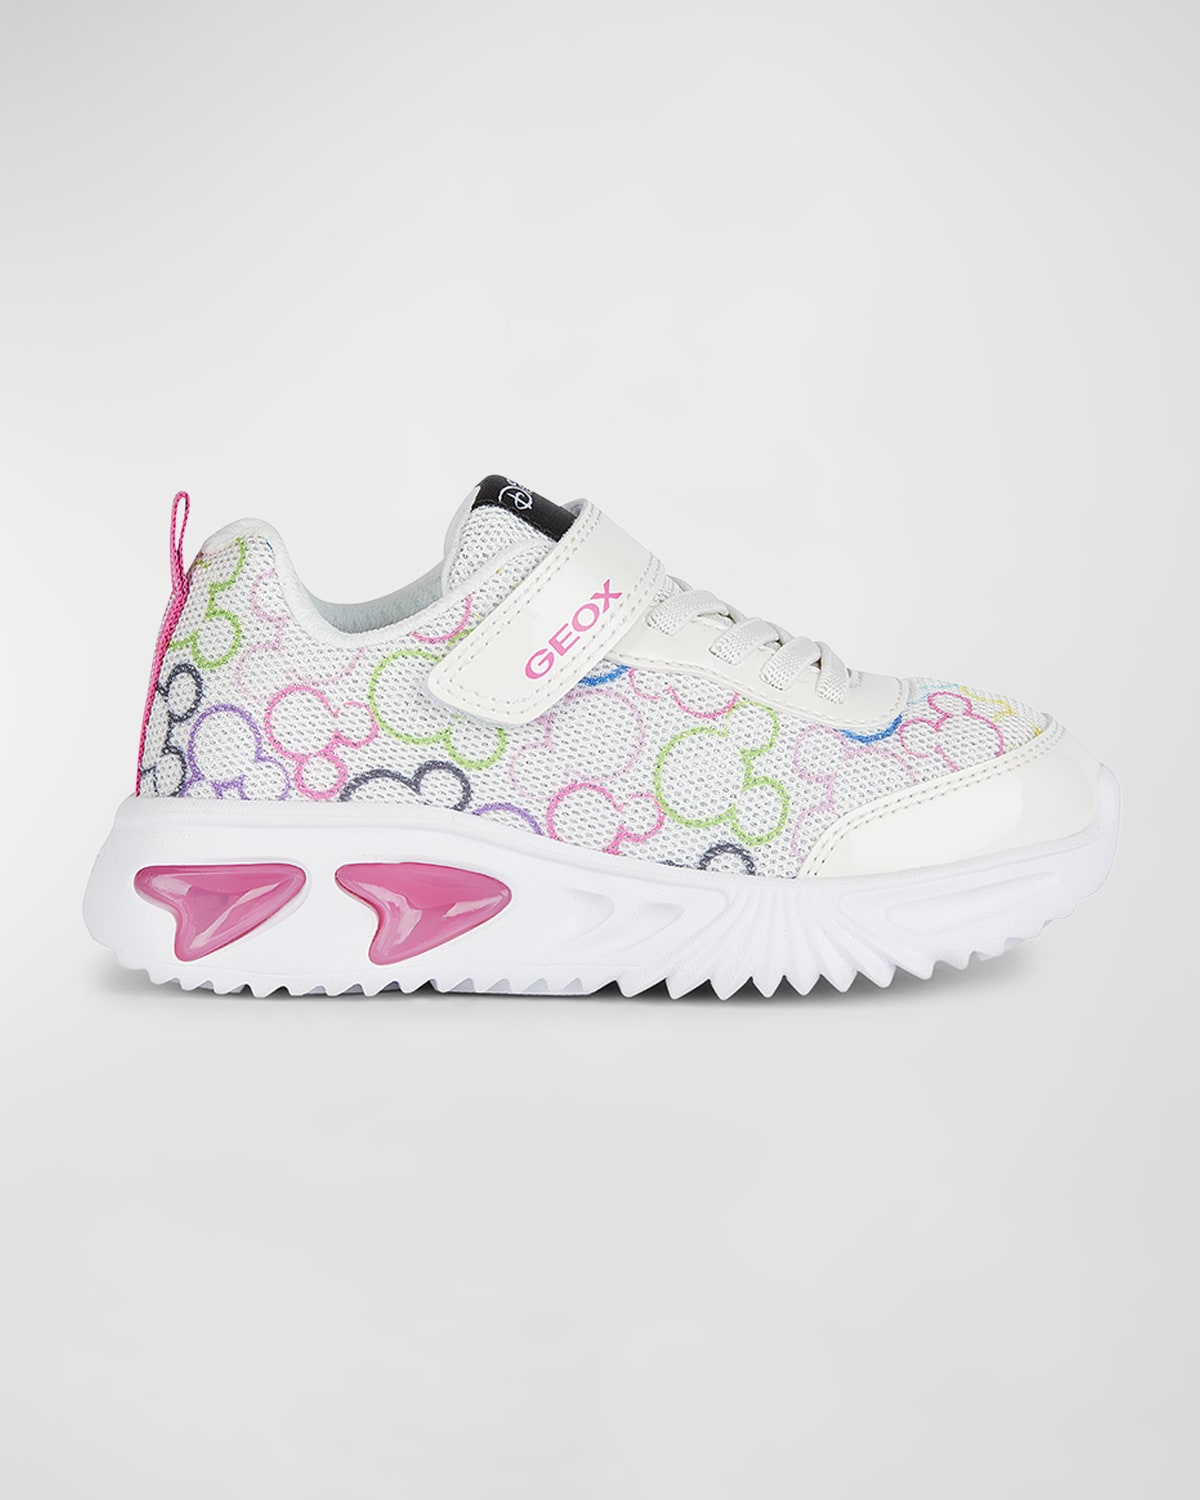 Geox X Disney Kid's Assister Sneakers, Toddler/kids In White/multicolor